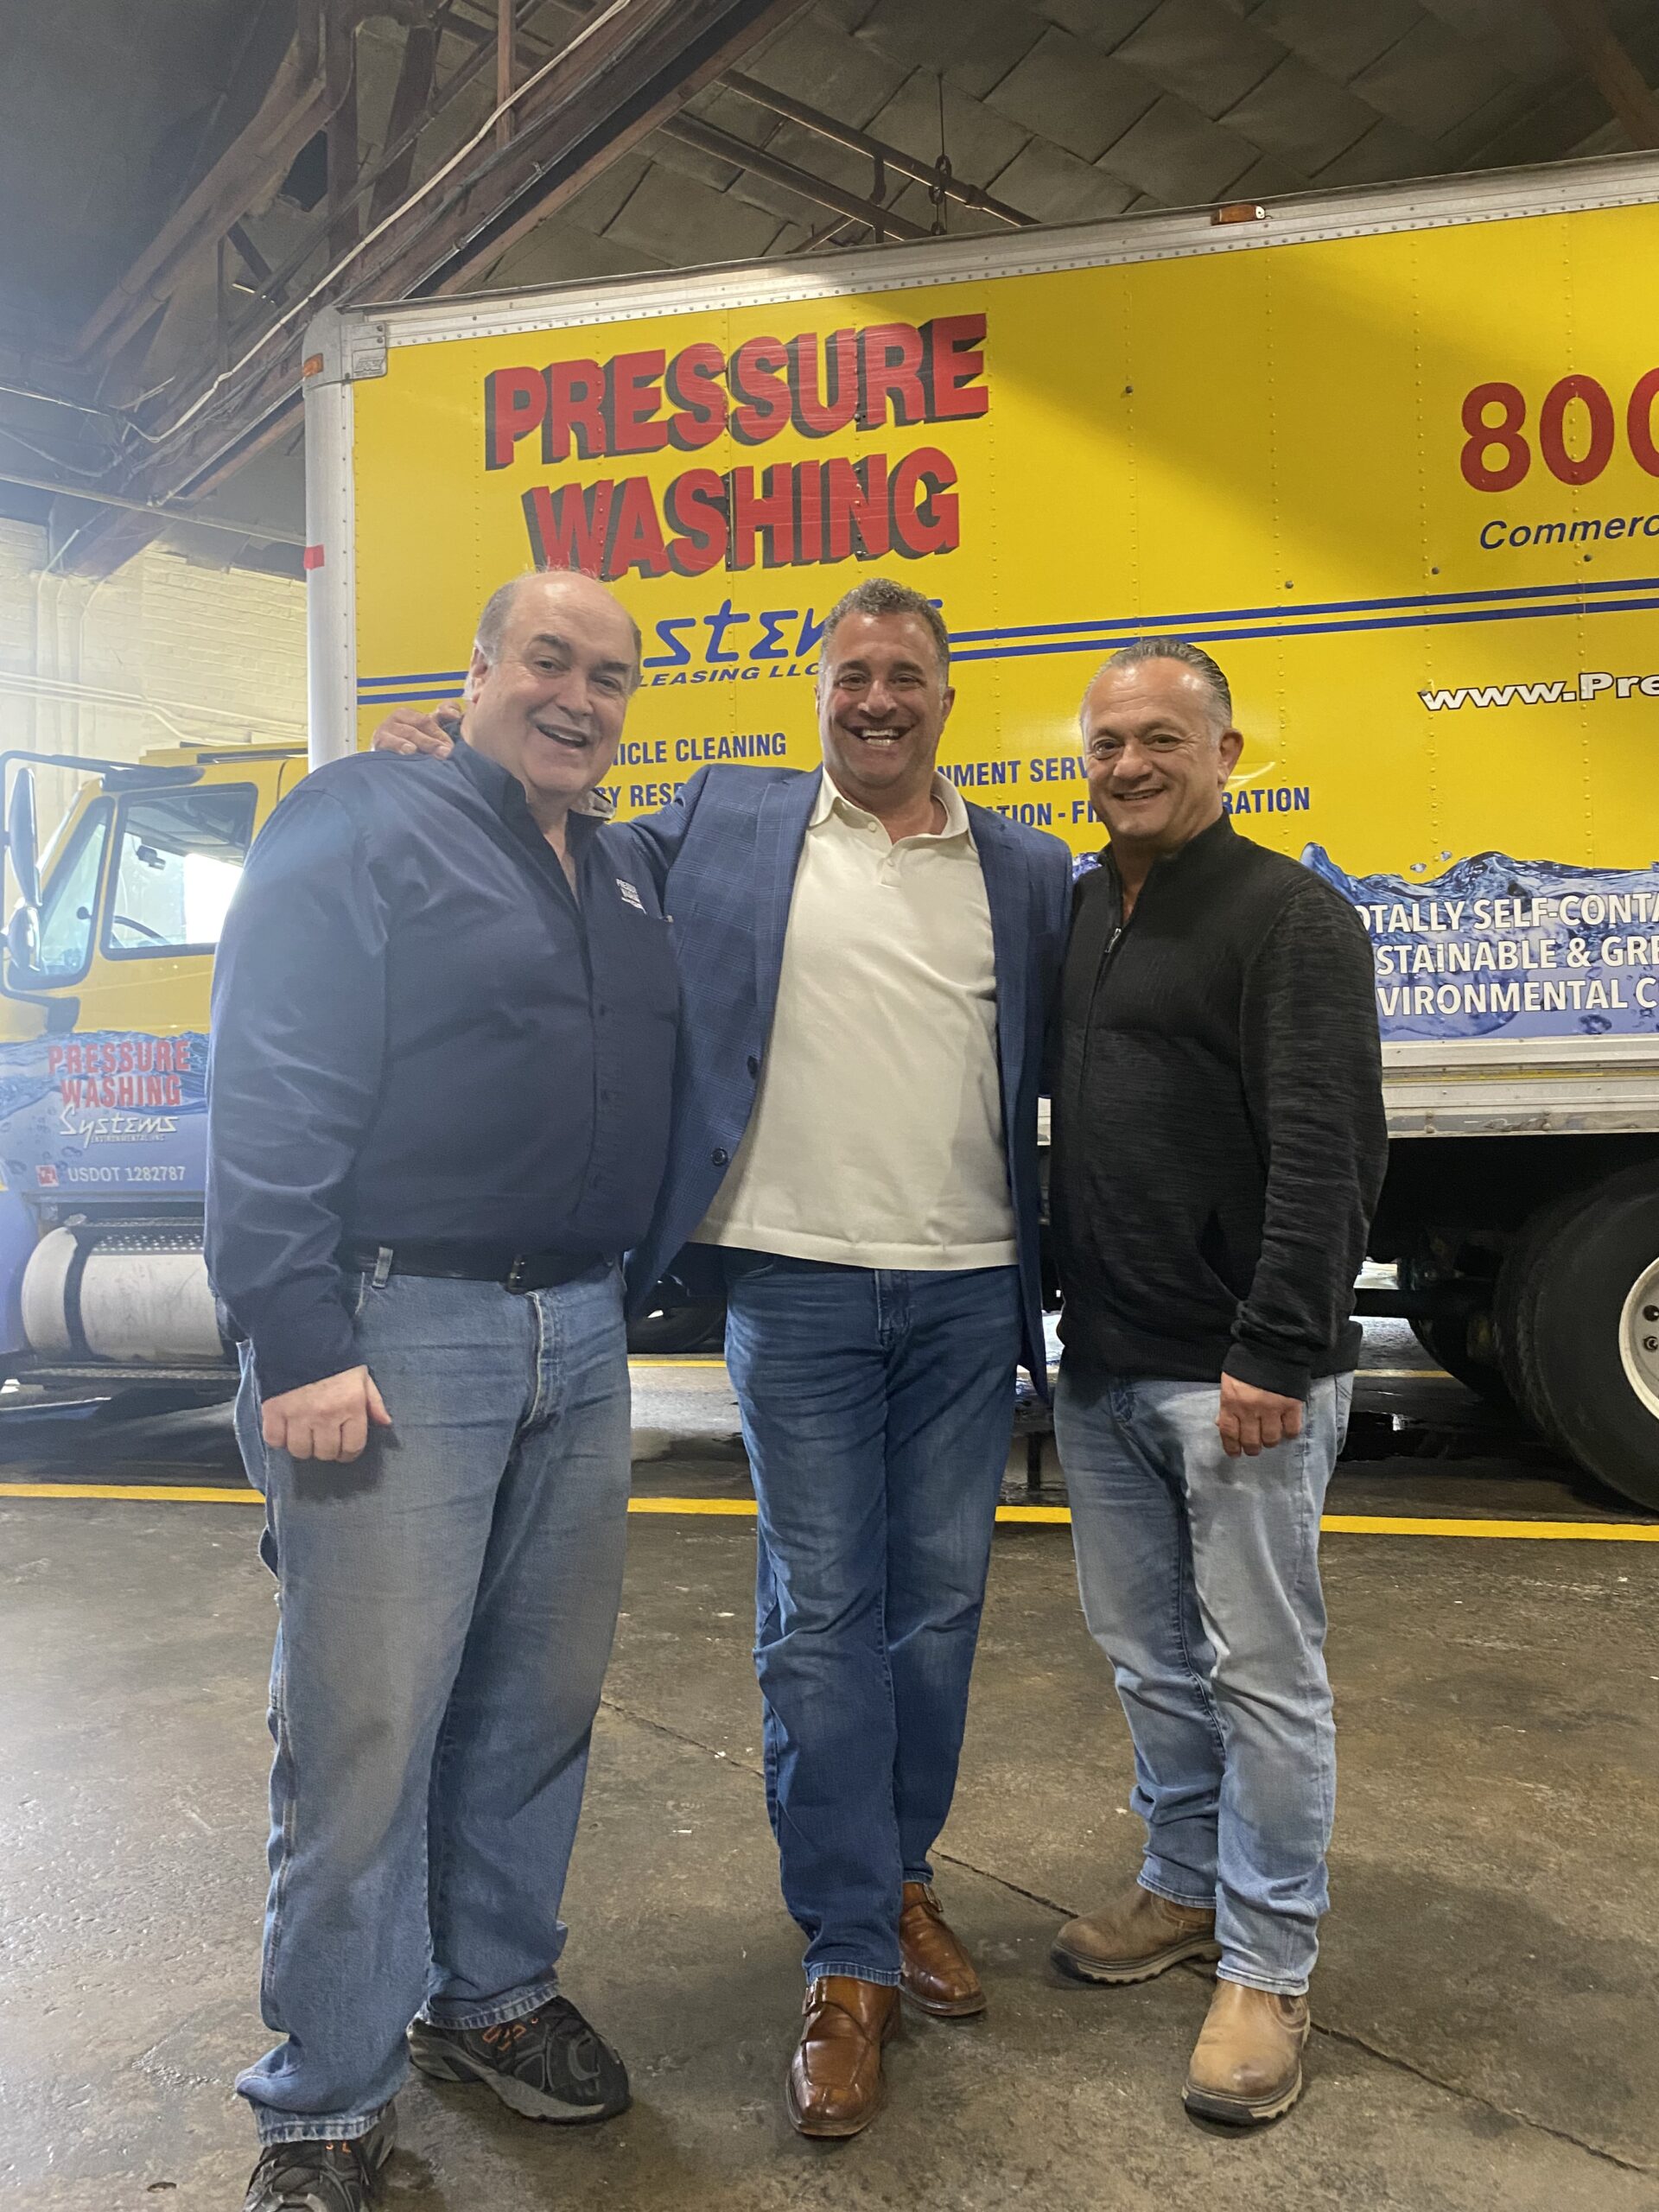 From left to right: Mike Millette, senior estimator; Bill Mologousis, president; and Tony Spacone, operations chief. Photo courtesy PWS